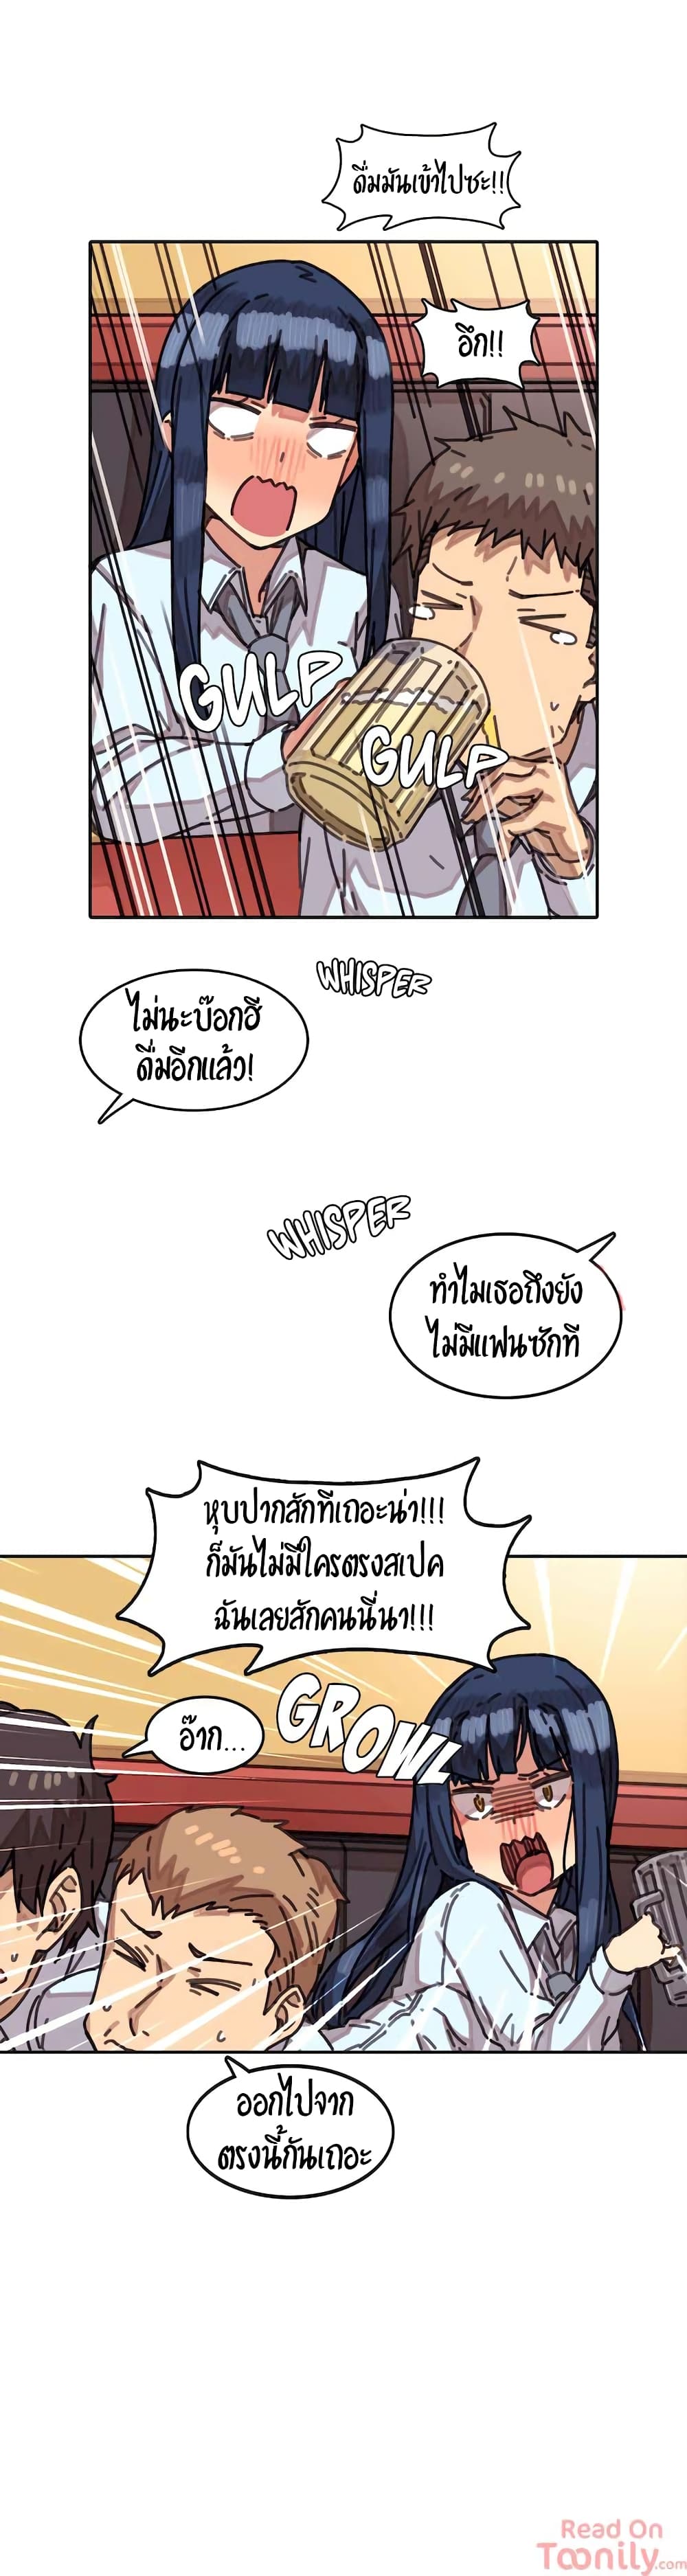 The Girl That Lingers in the Wall - หน้า 24